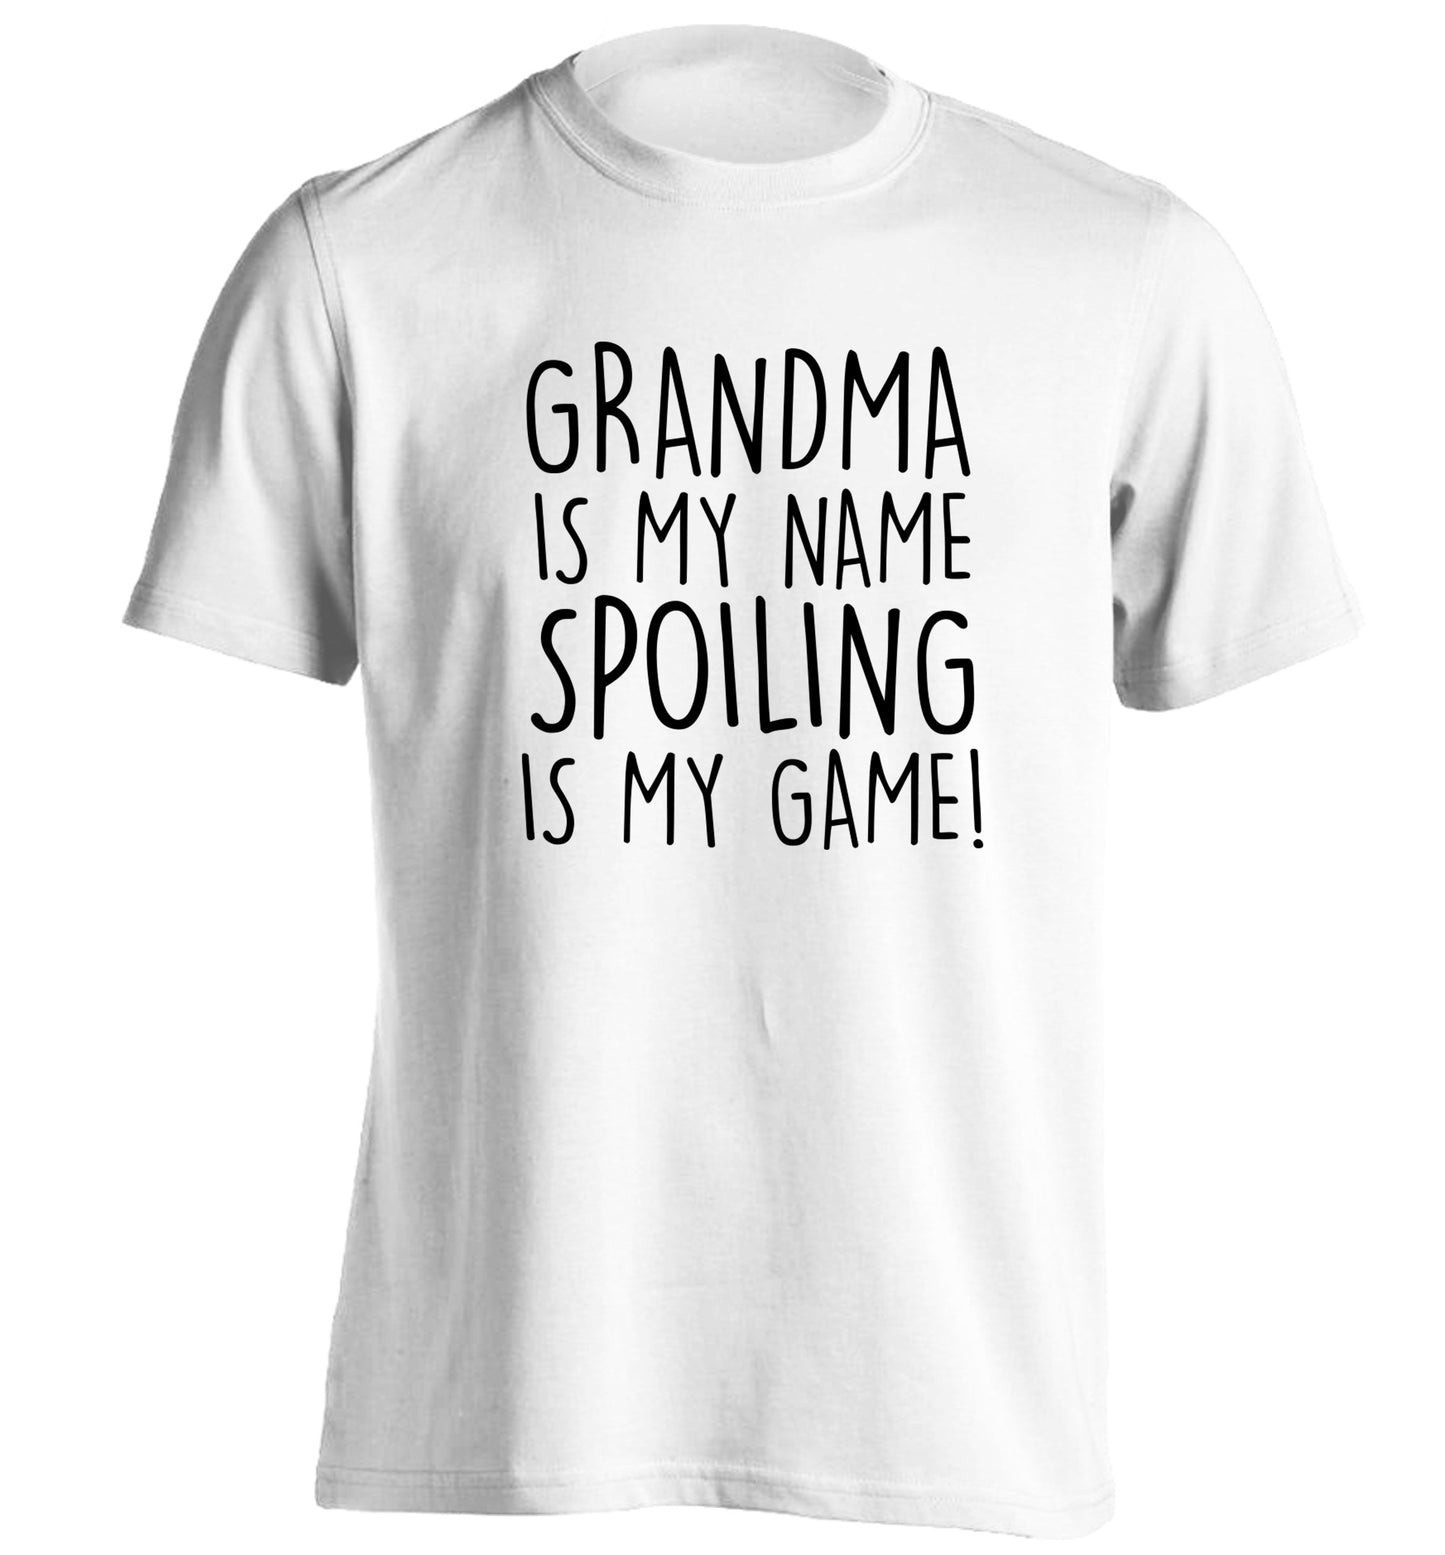 Grandma is my name, spoiling is my game adults unisex white Tshirt 2XL